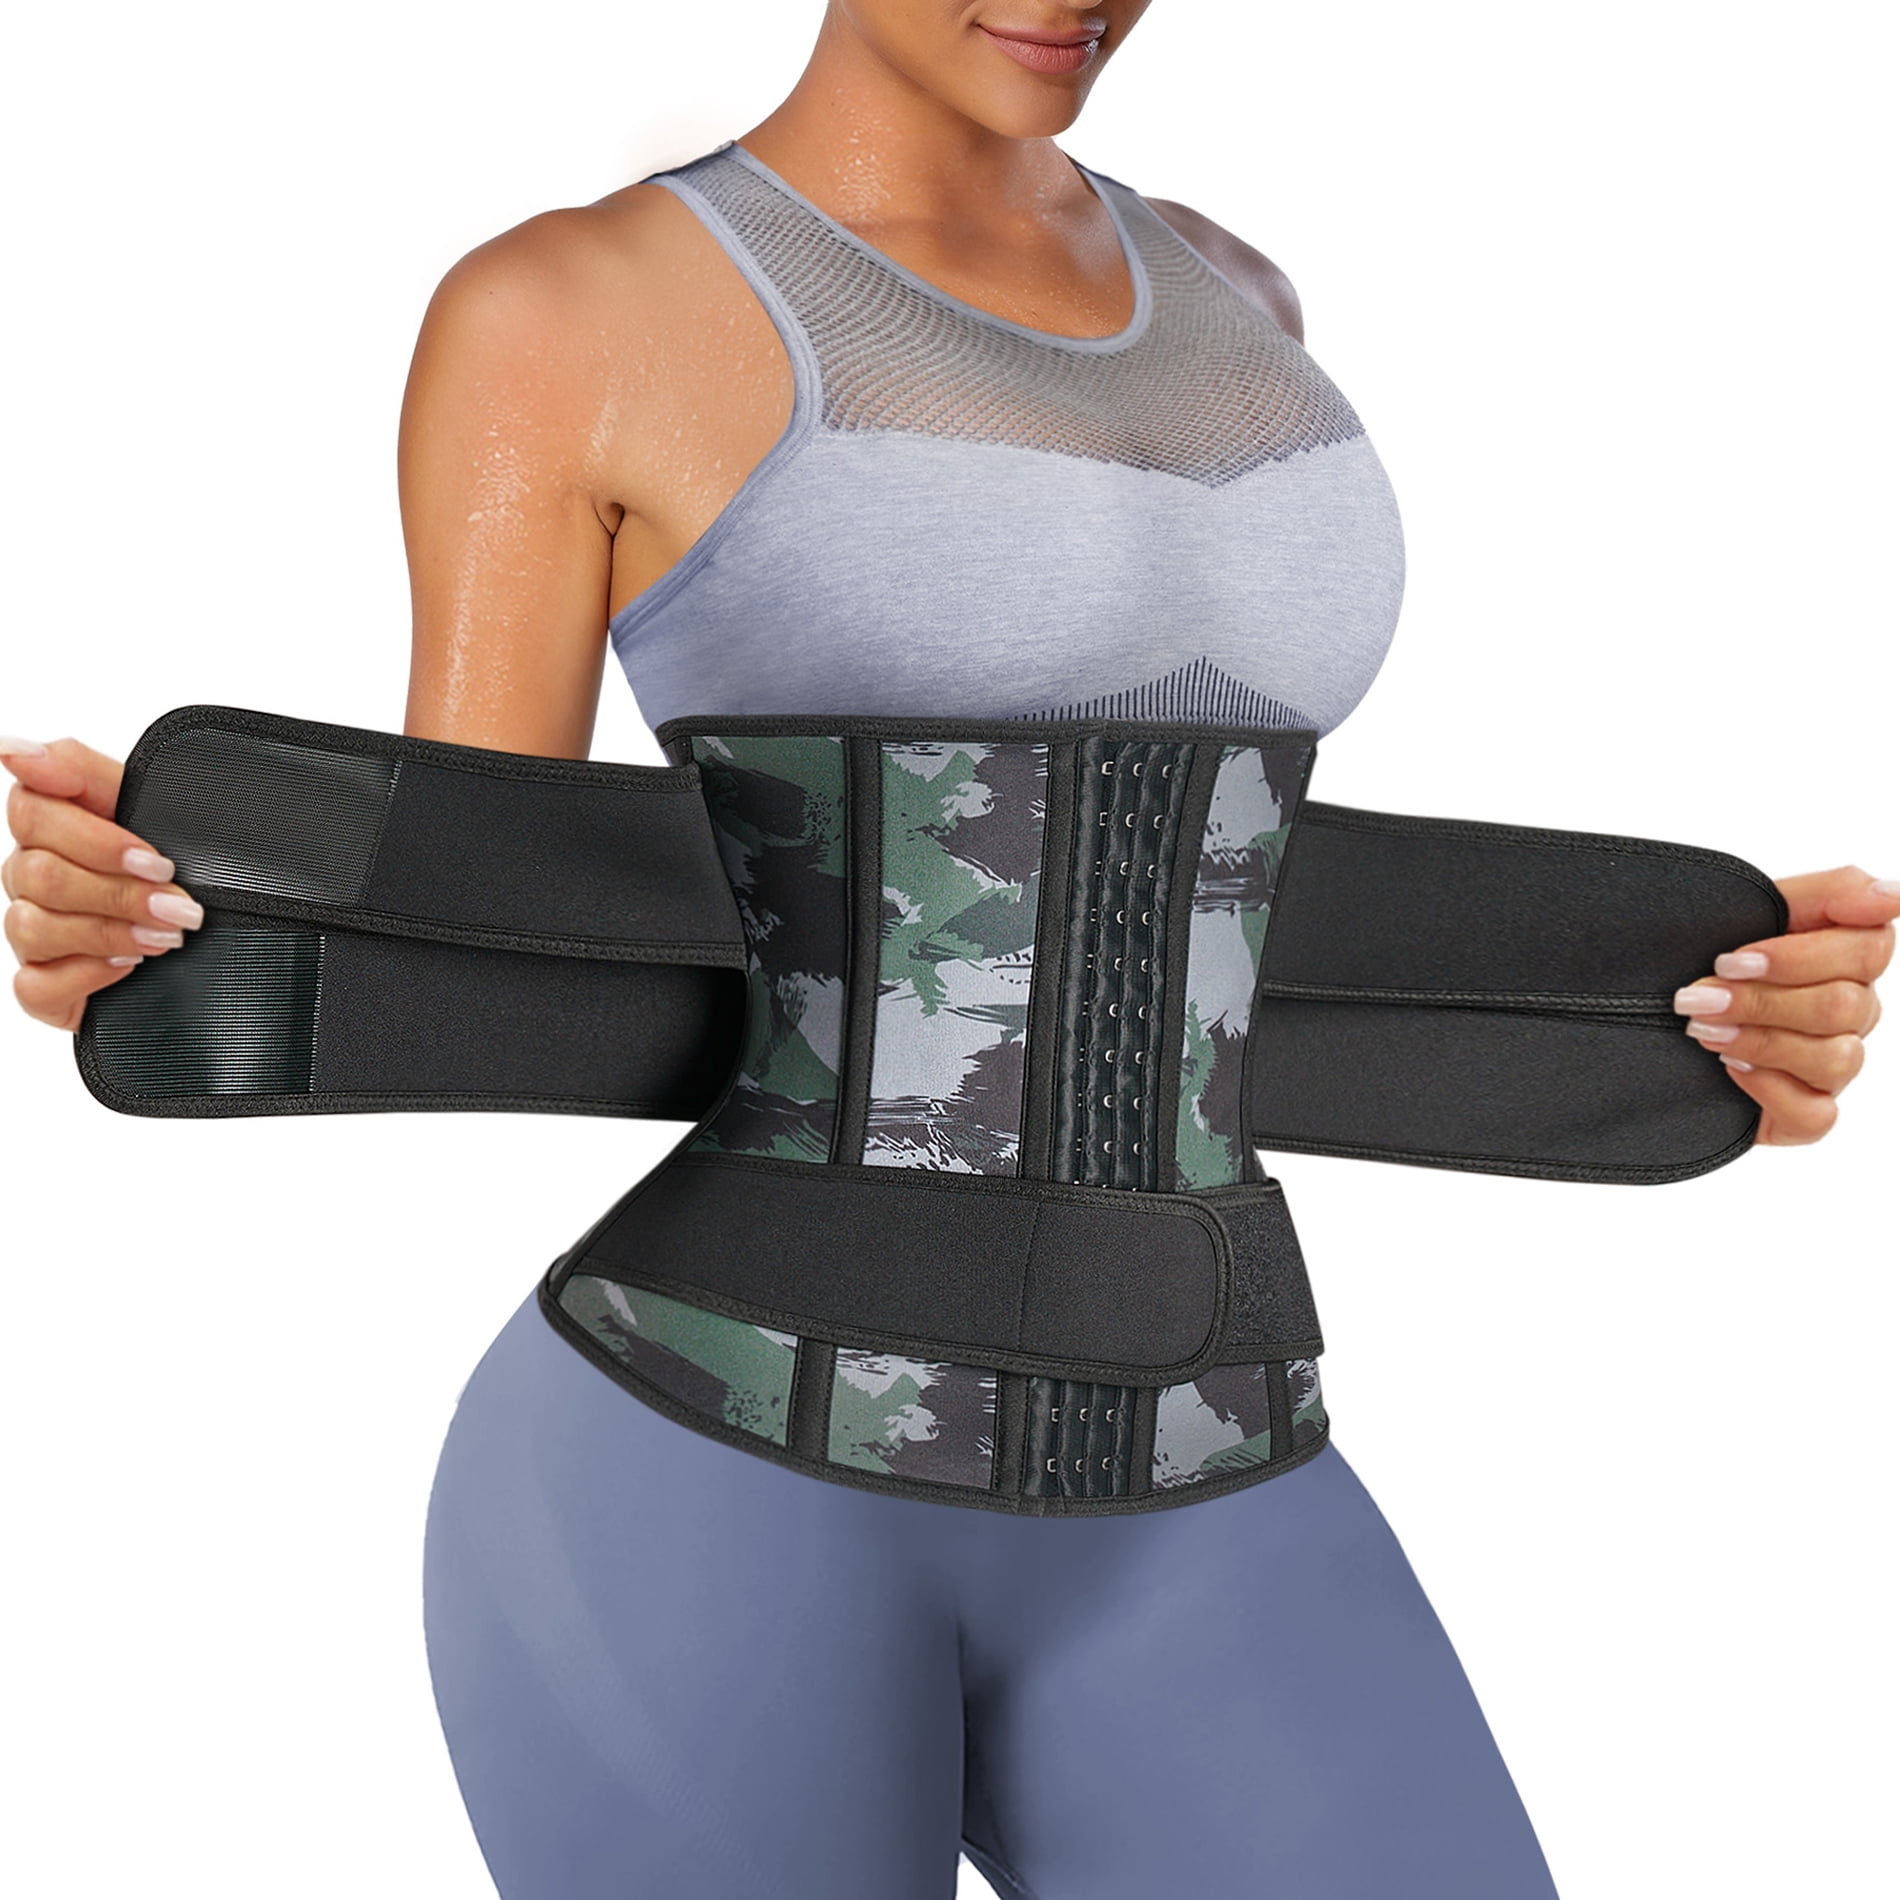 Waist Trainer for Women Stomach Wraps for Weight Loss Wasit Shaper Trimmer Belt Tummy Control Corset 